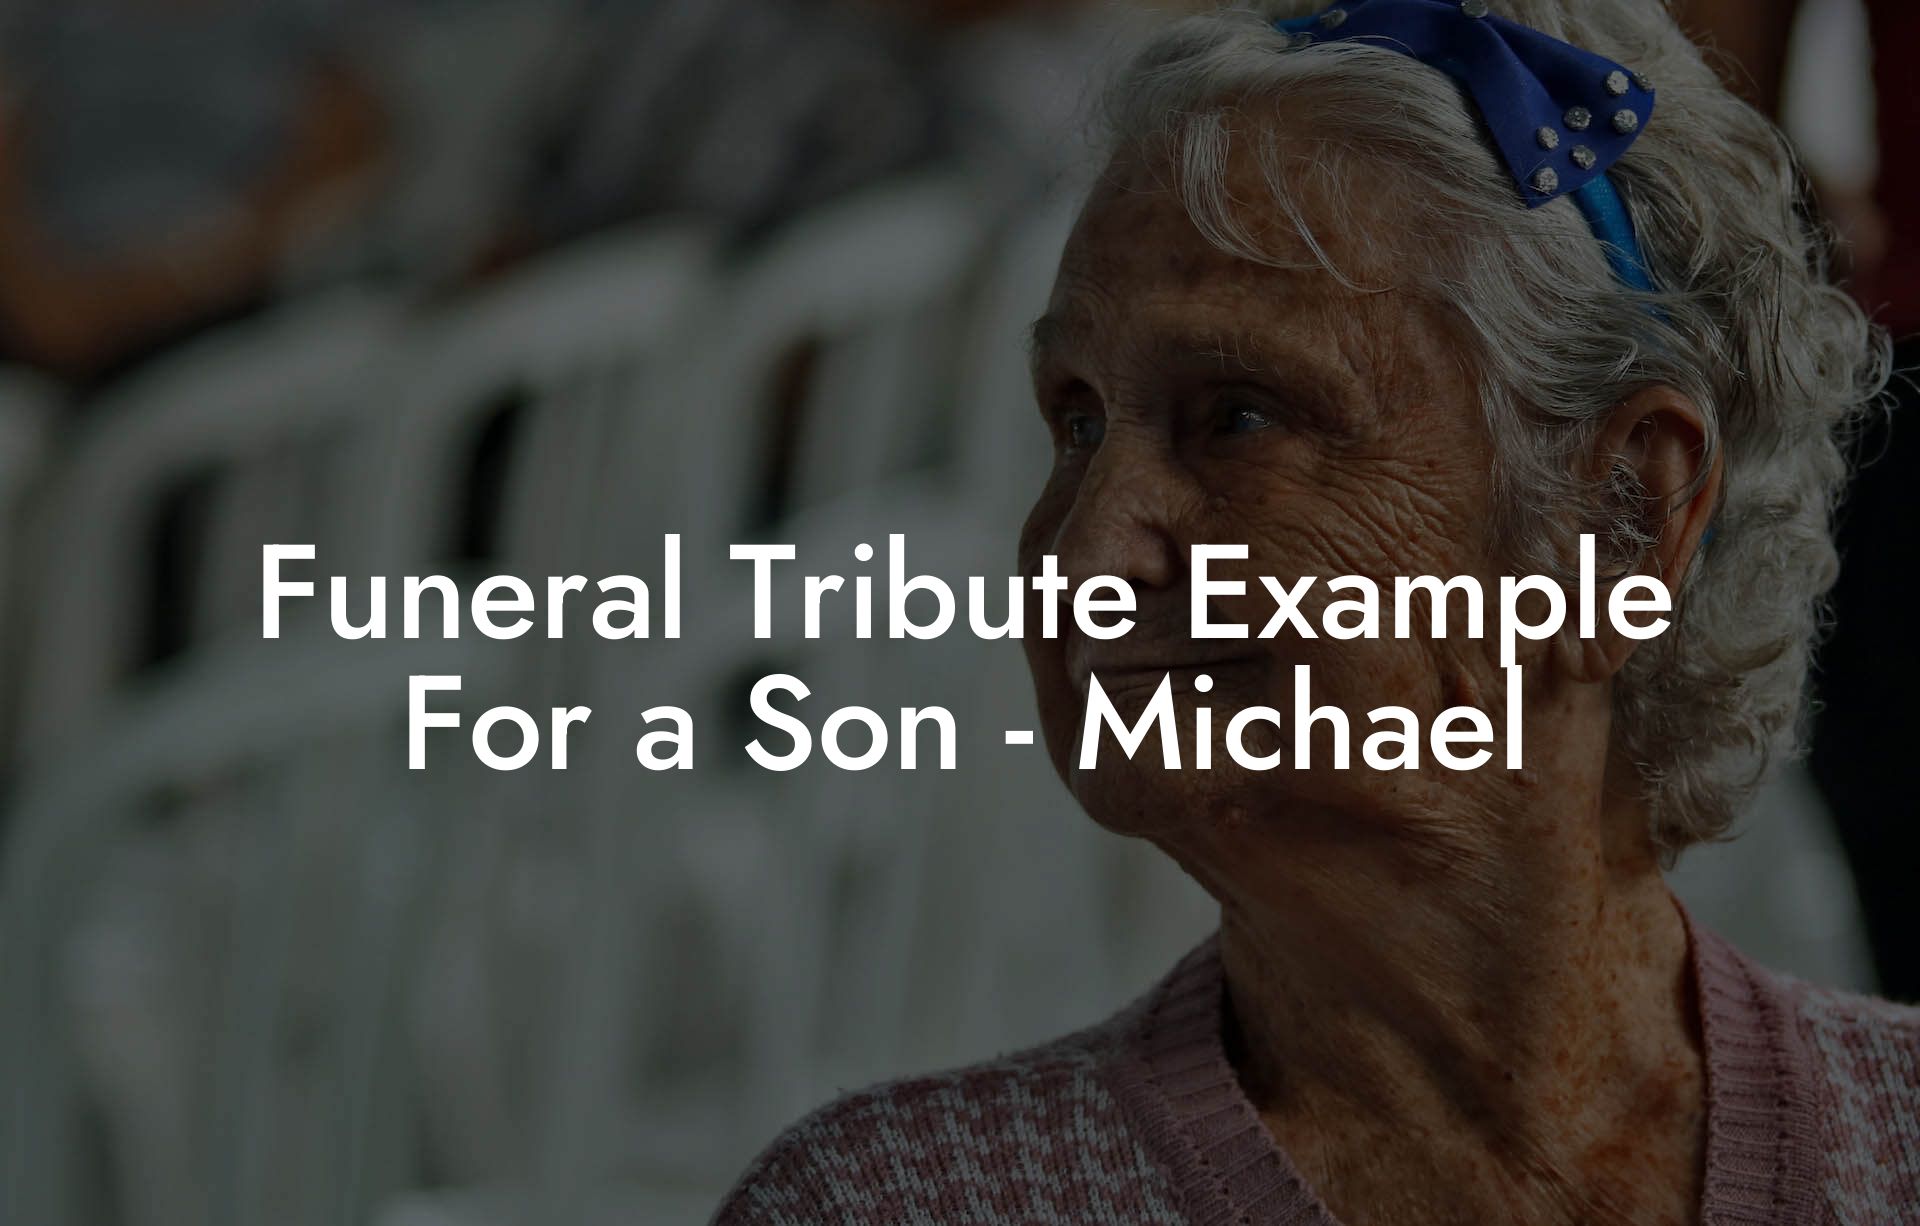 Funeral Tribute Example For a Son - Michael